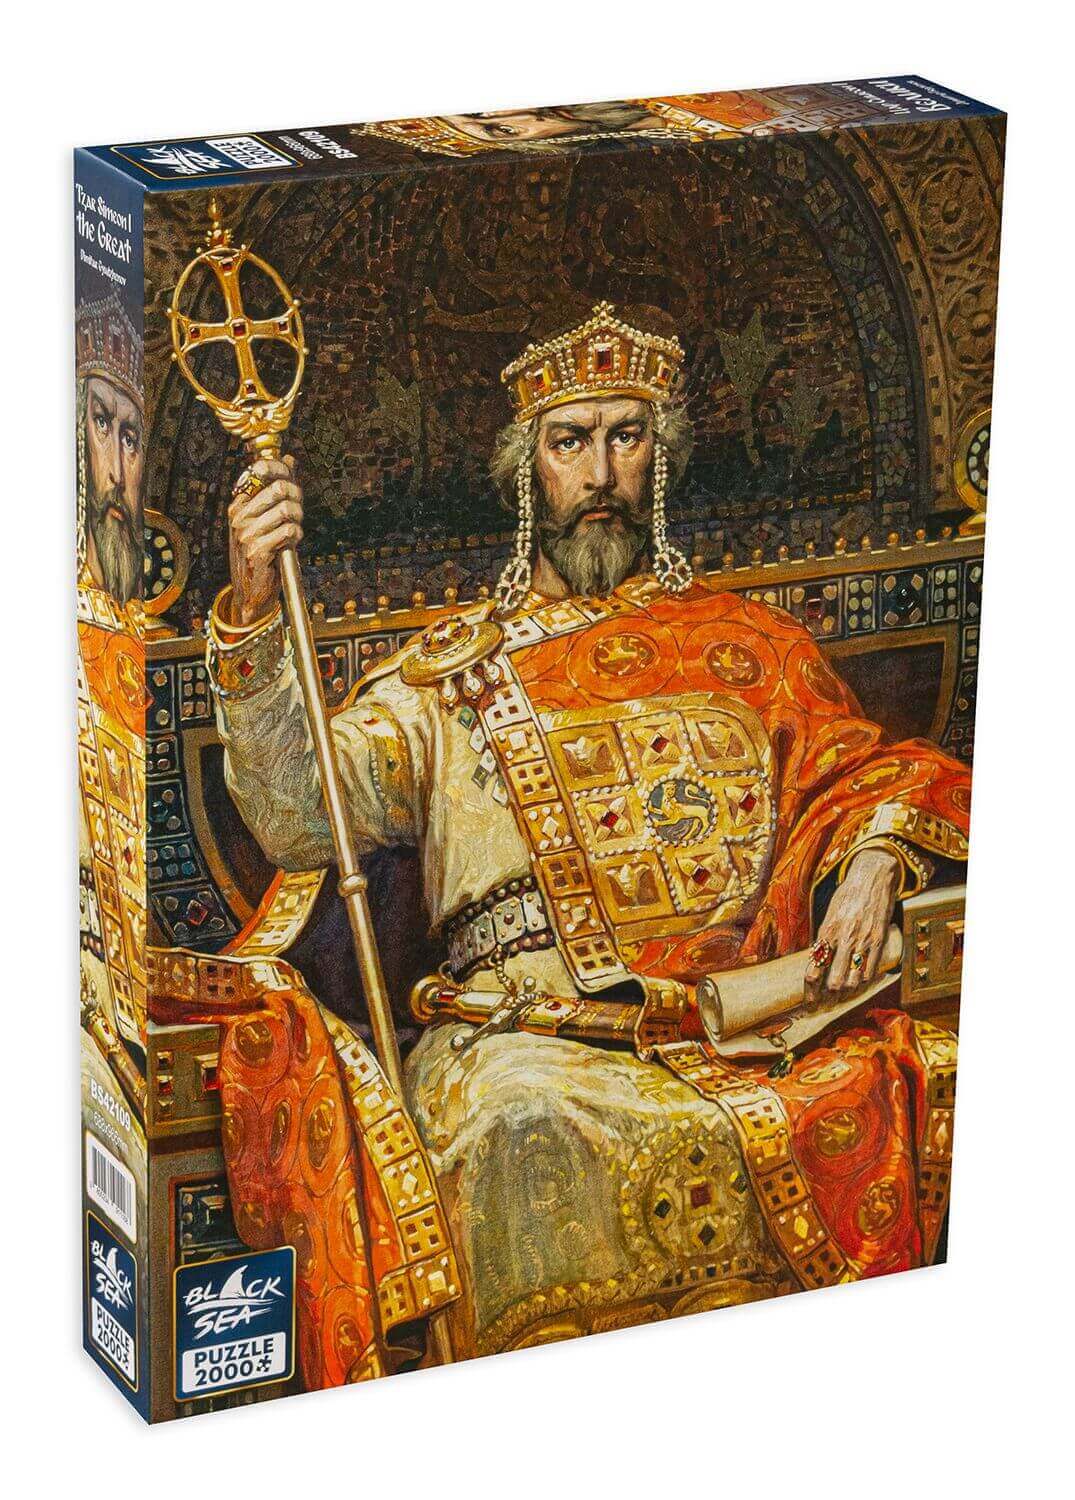 Puzzle Black Sea 2000 pieces - Tzar Simeon 1 the Great, Tzar Simeon I the Great is a Bulgarian ruler; he reigned from 893 to 927. Simeon the Great is the symbol of power, strength and cultural prosperity. His skillful home and foreign policies, along with